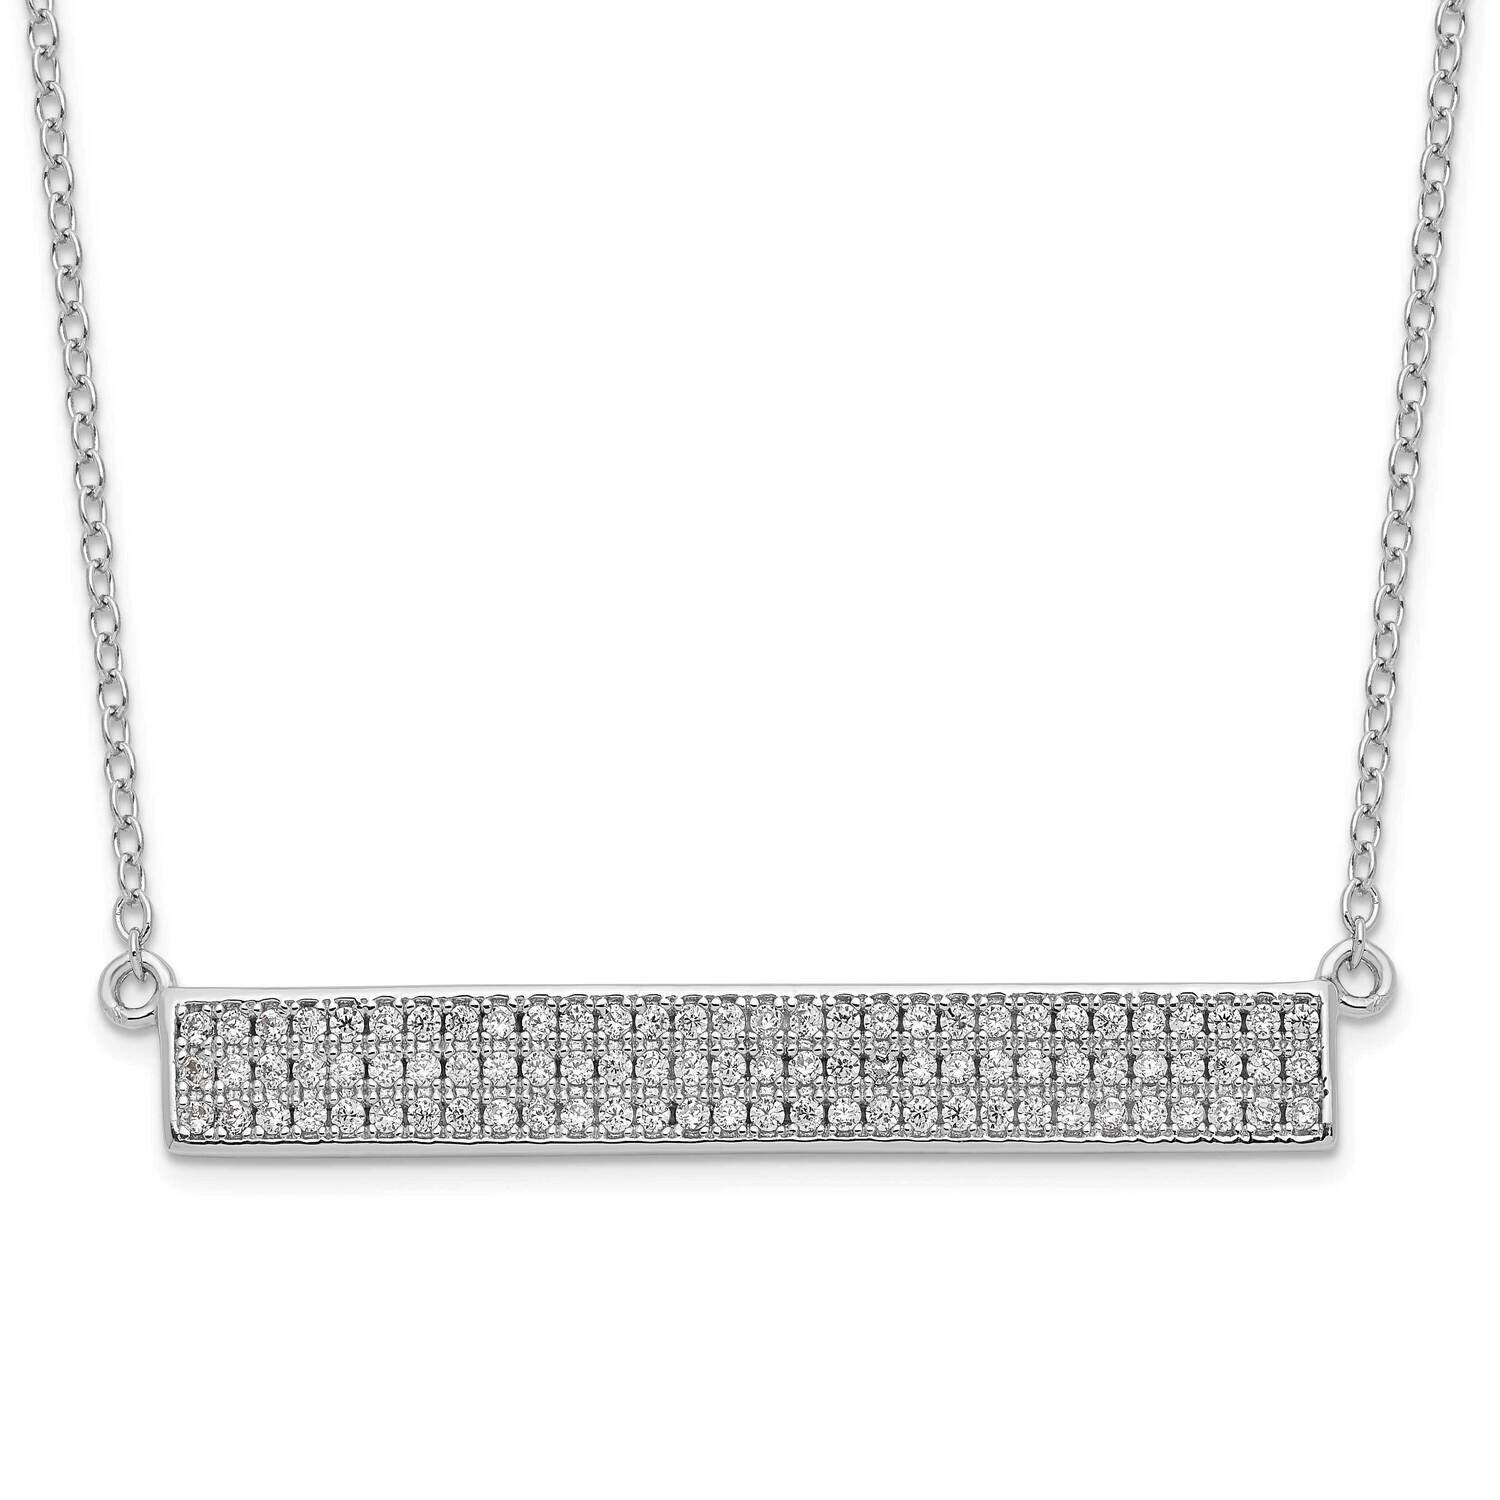 Cheryl M Rhodium-Plated CZ Diamond Bar with 1.5 Inch Ext. Necklace Sterling Silver QCM1521-17.5